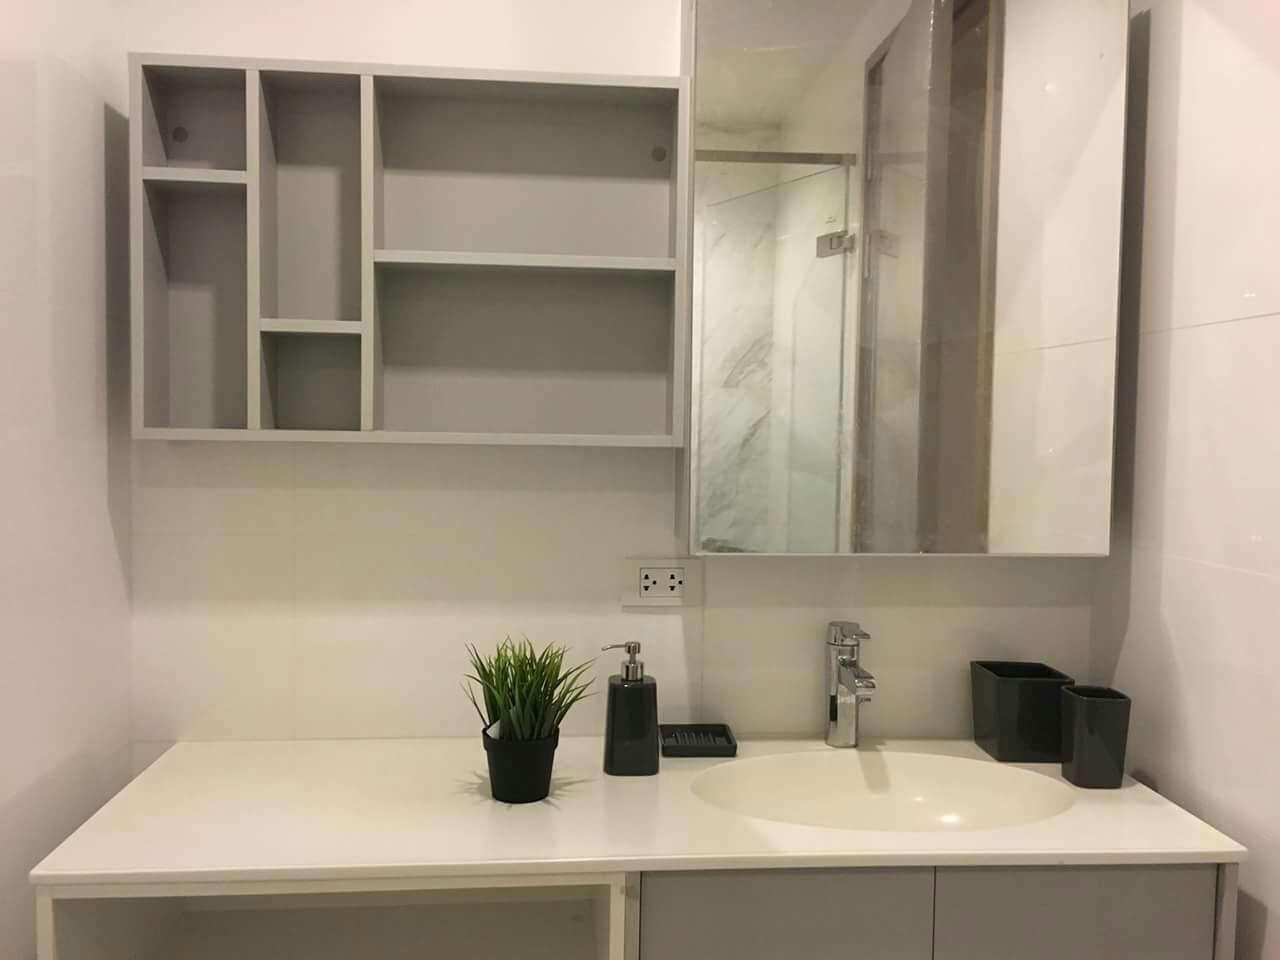 RE/MAX Properties Agency's High End condominium 1 bedroom for sale with tenant in Thonglor area, Bangkok 5